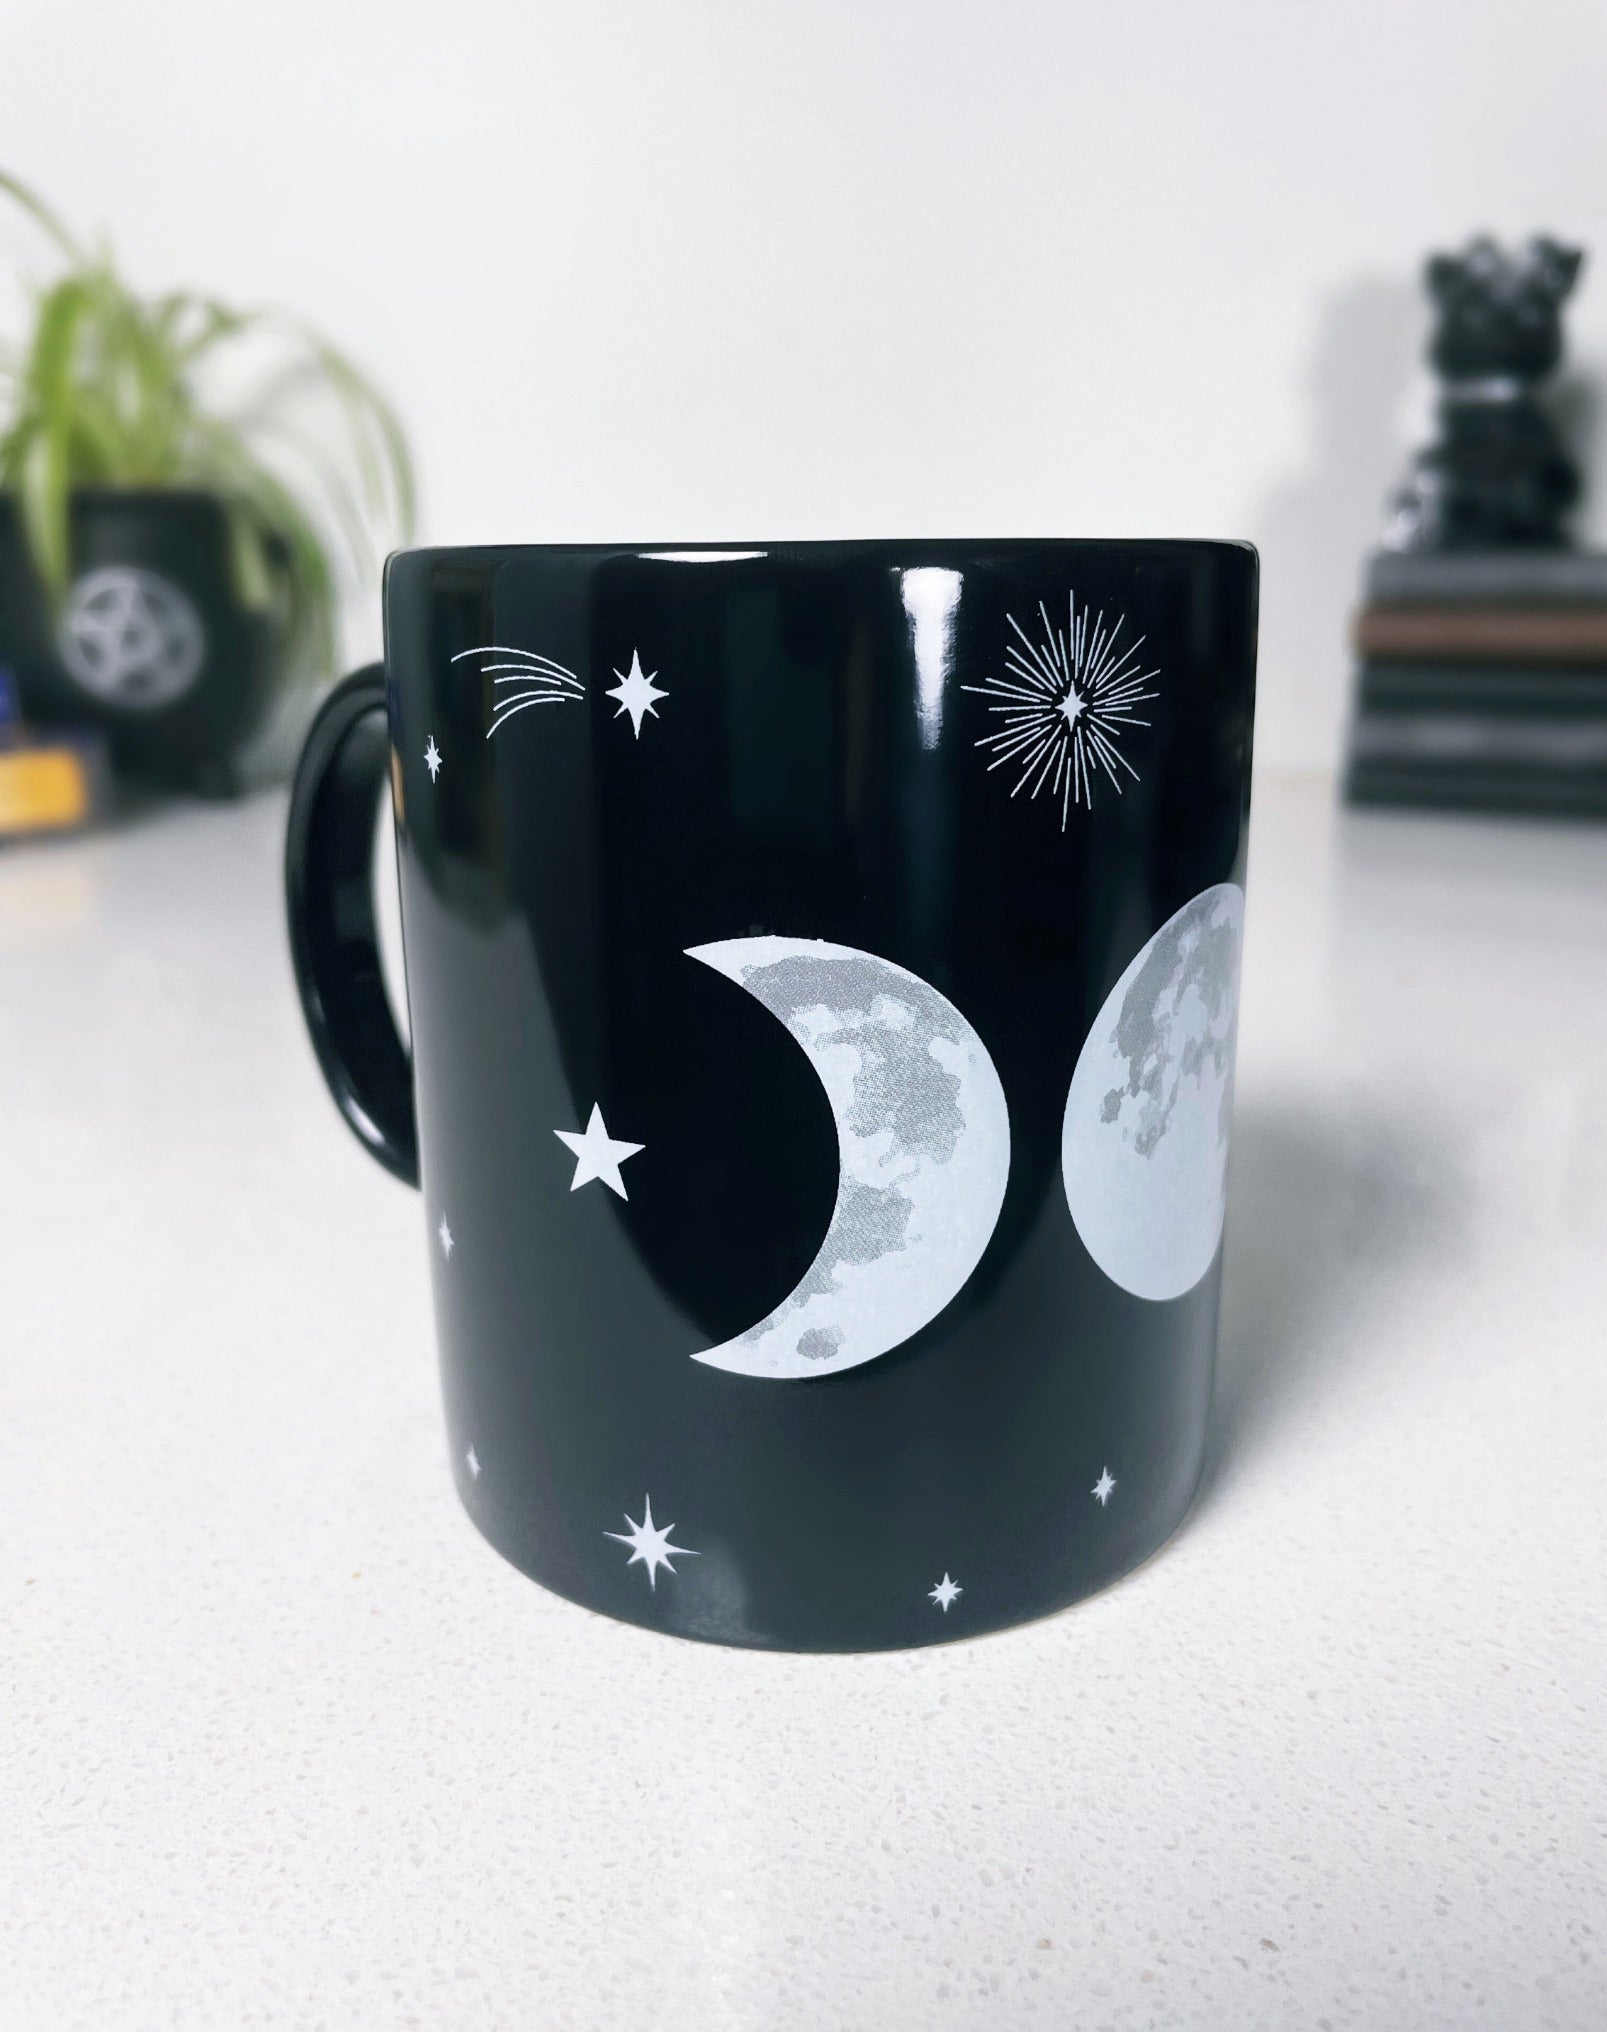 Pictured is a black ceramic mug with a triple moon on it.